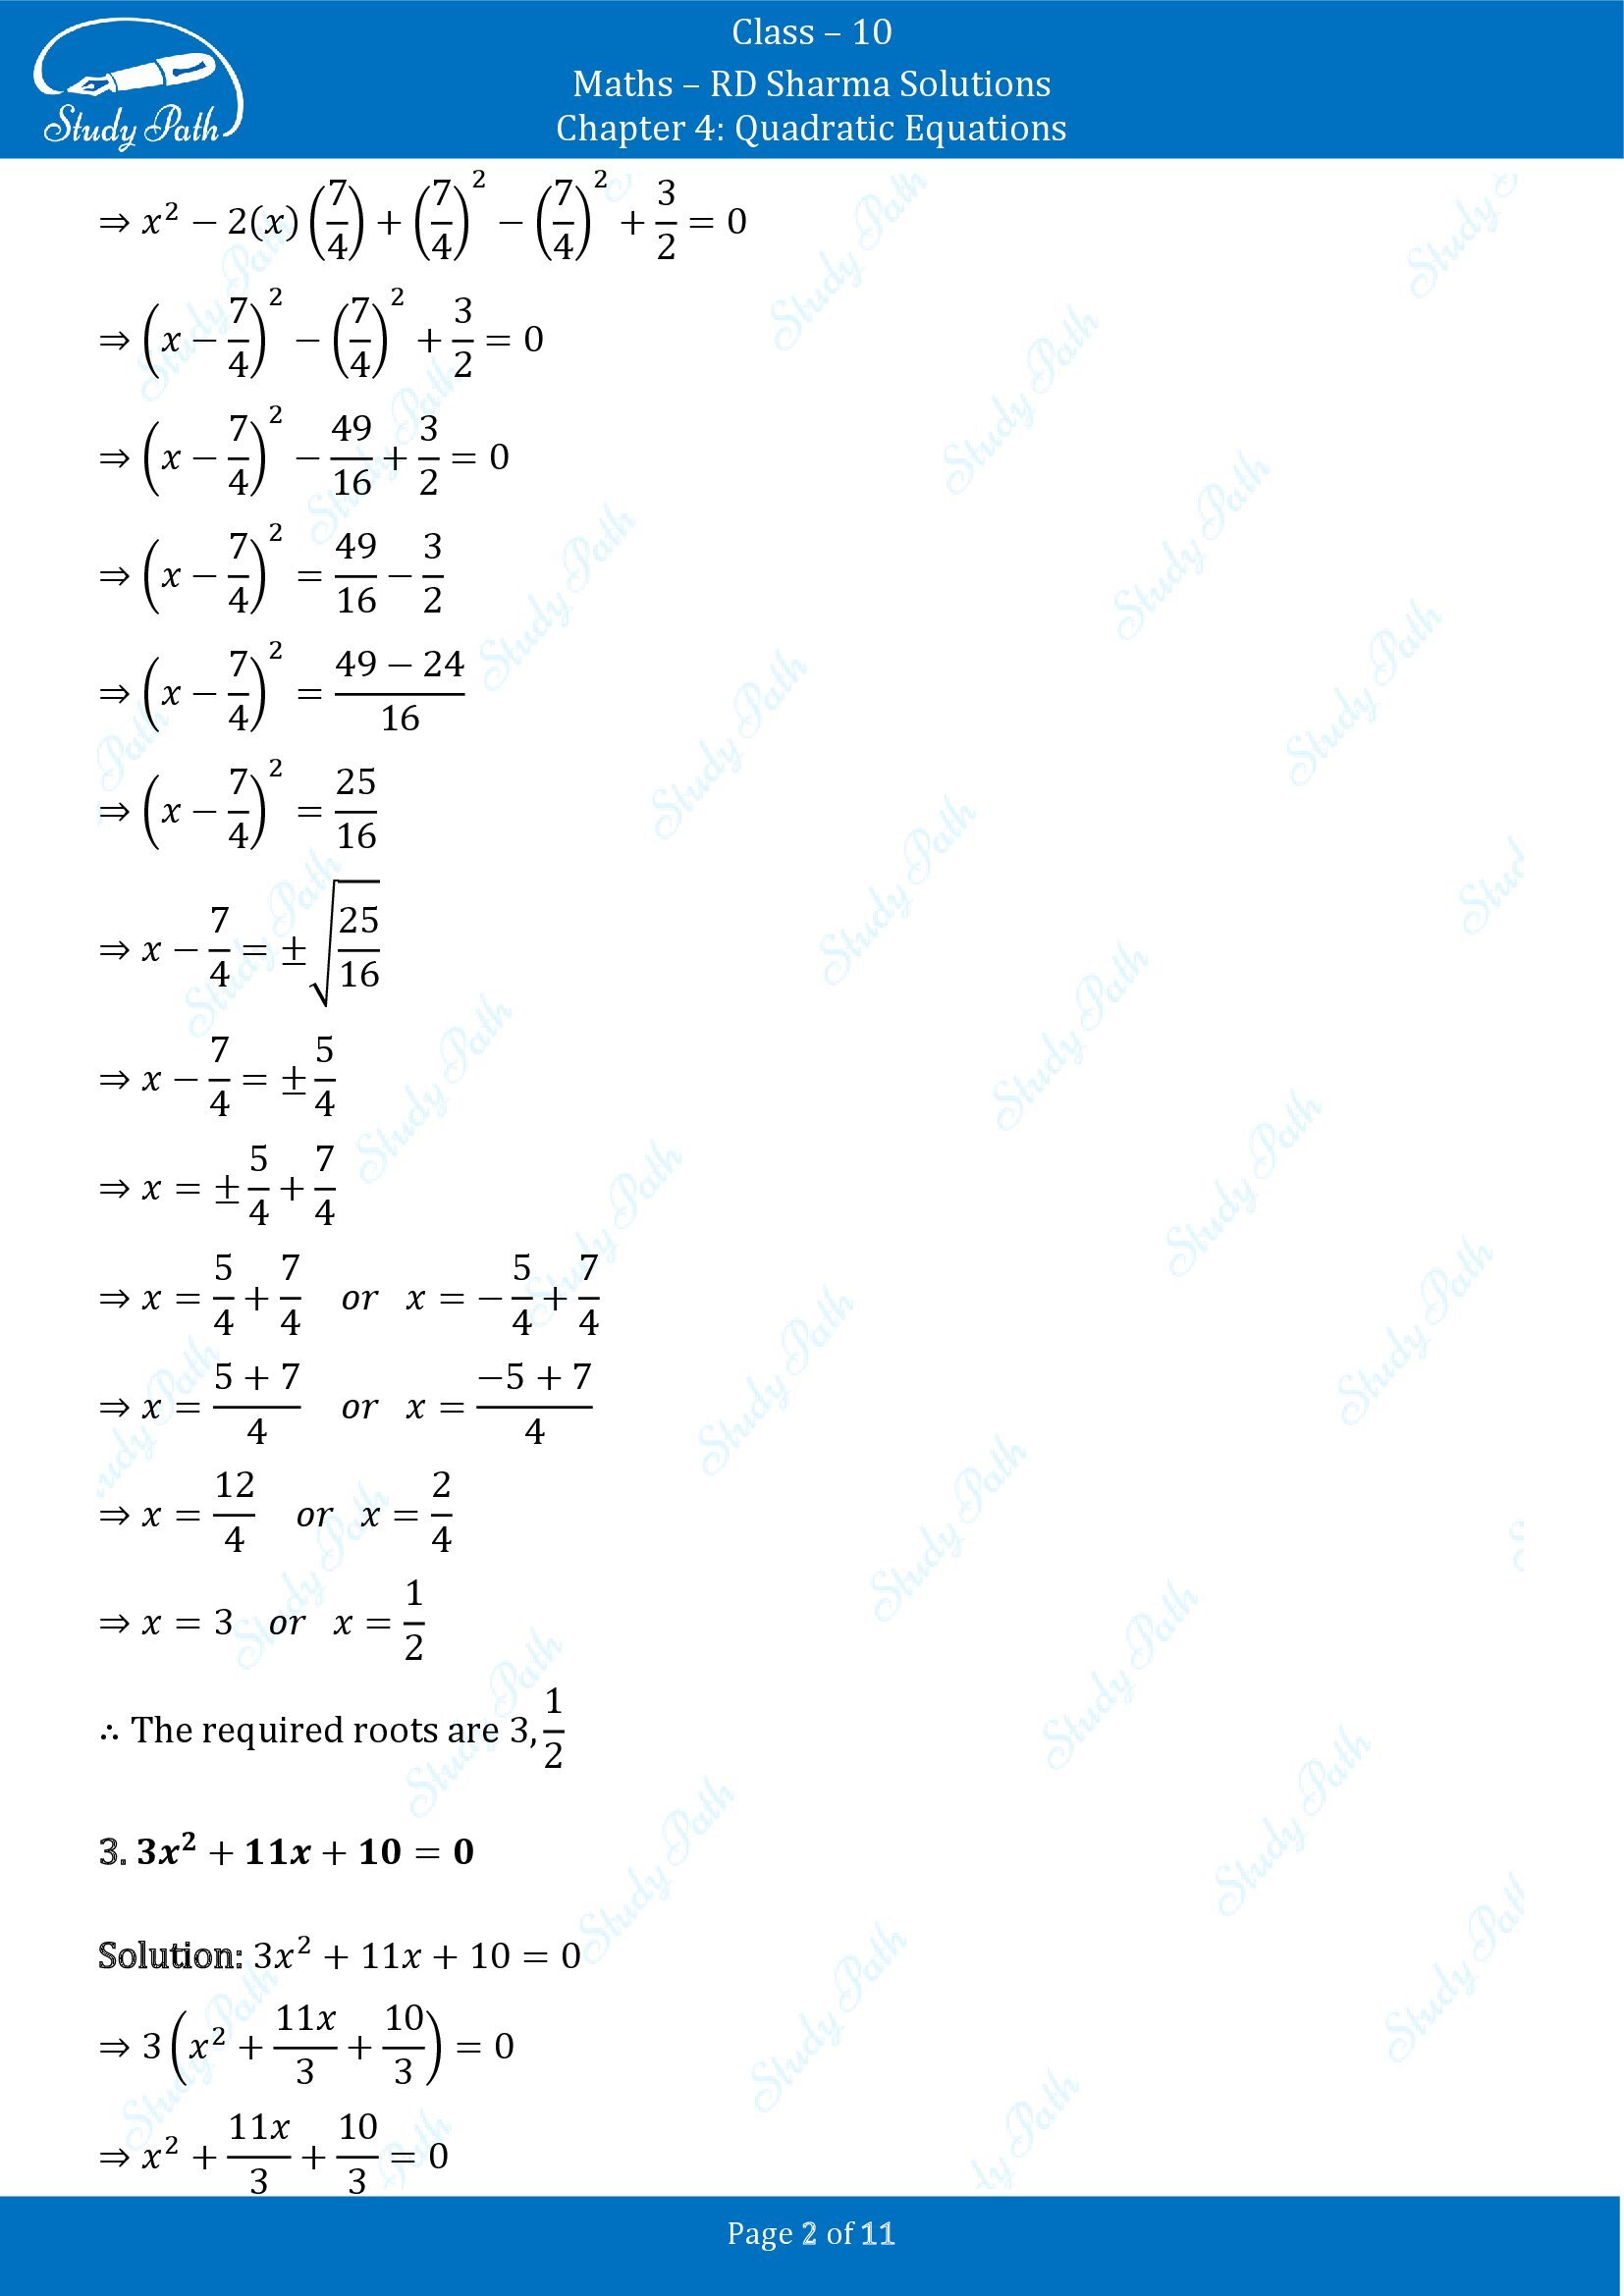 RD Sharma Solutions Class 10 Chapter 4 Quadratic Equations Exercise 4.4 00002